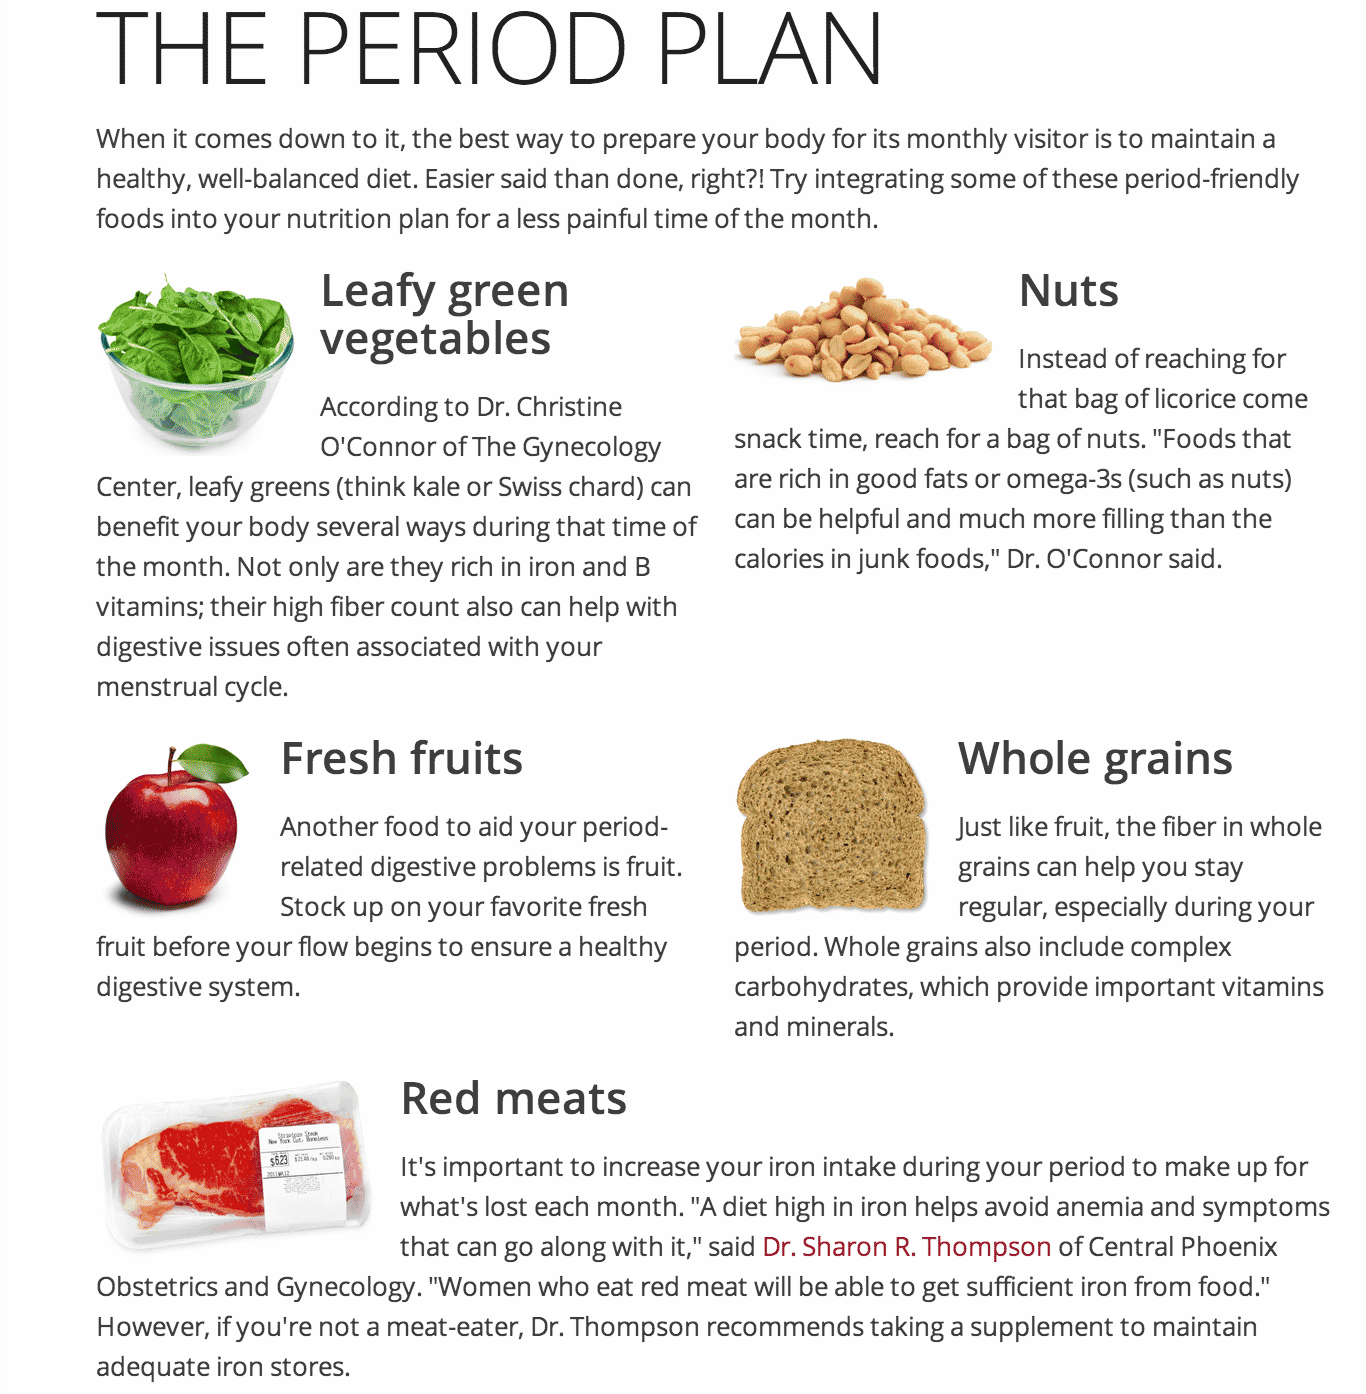 5 Foods you should eat during your period http://www.sheknows.com ...